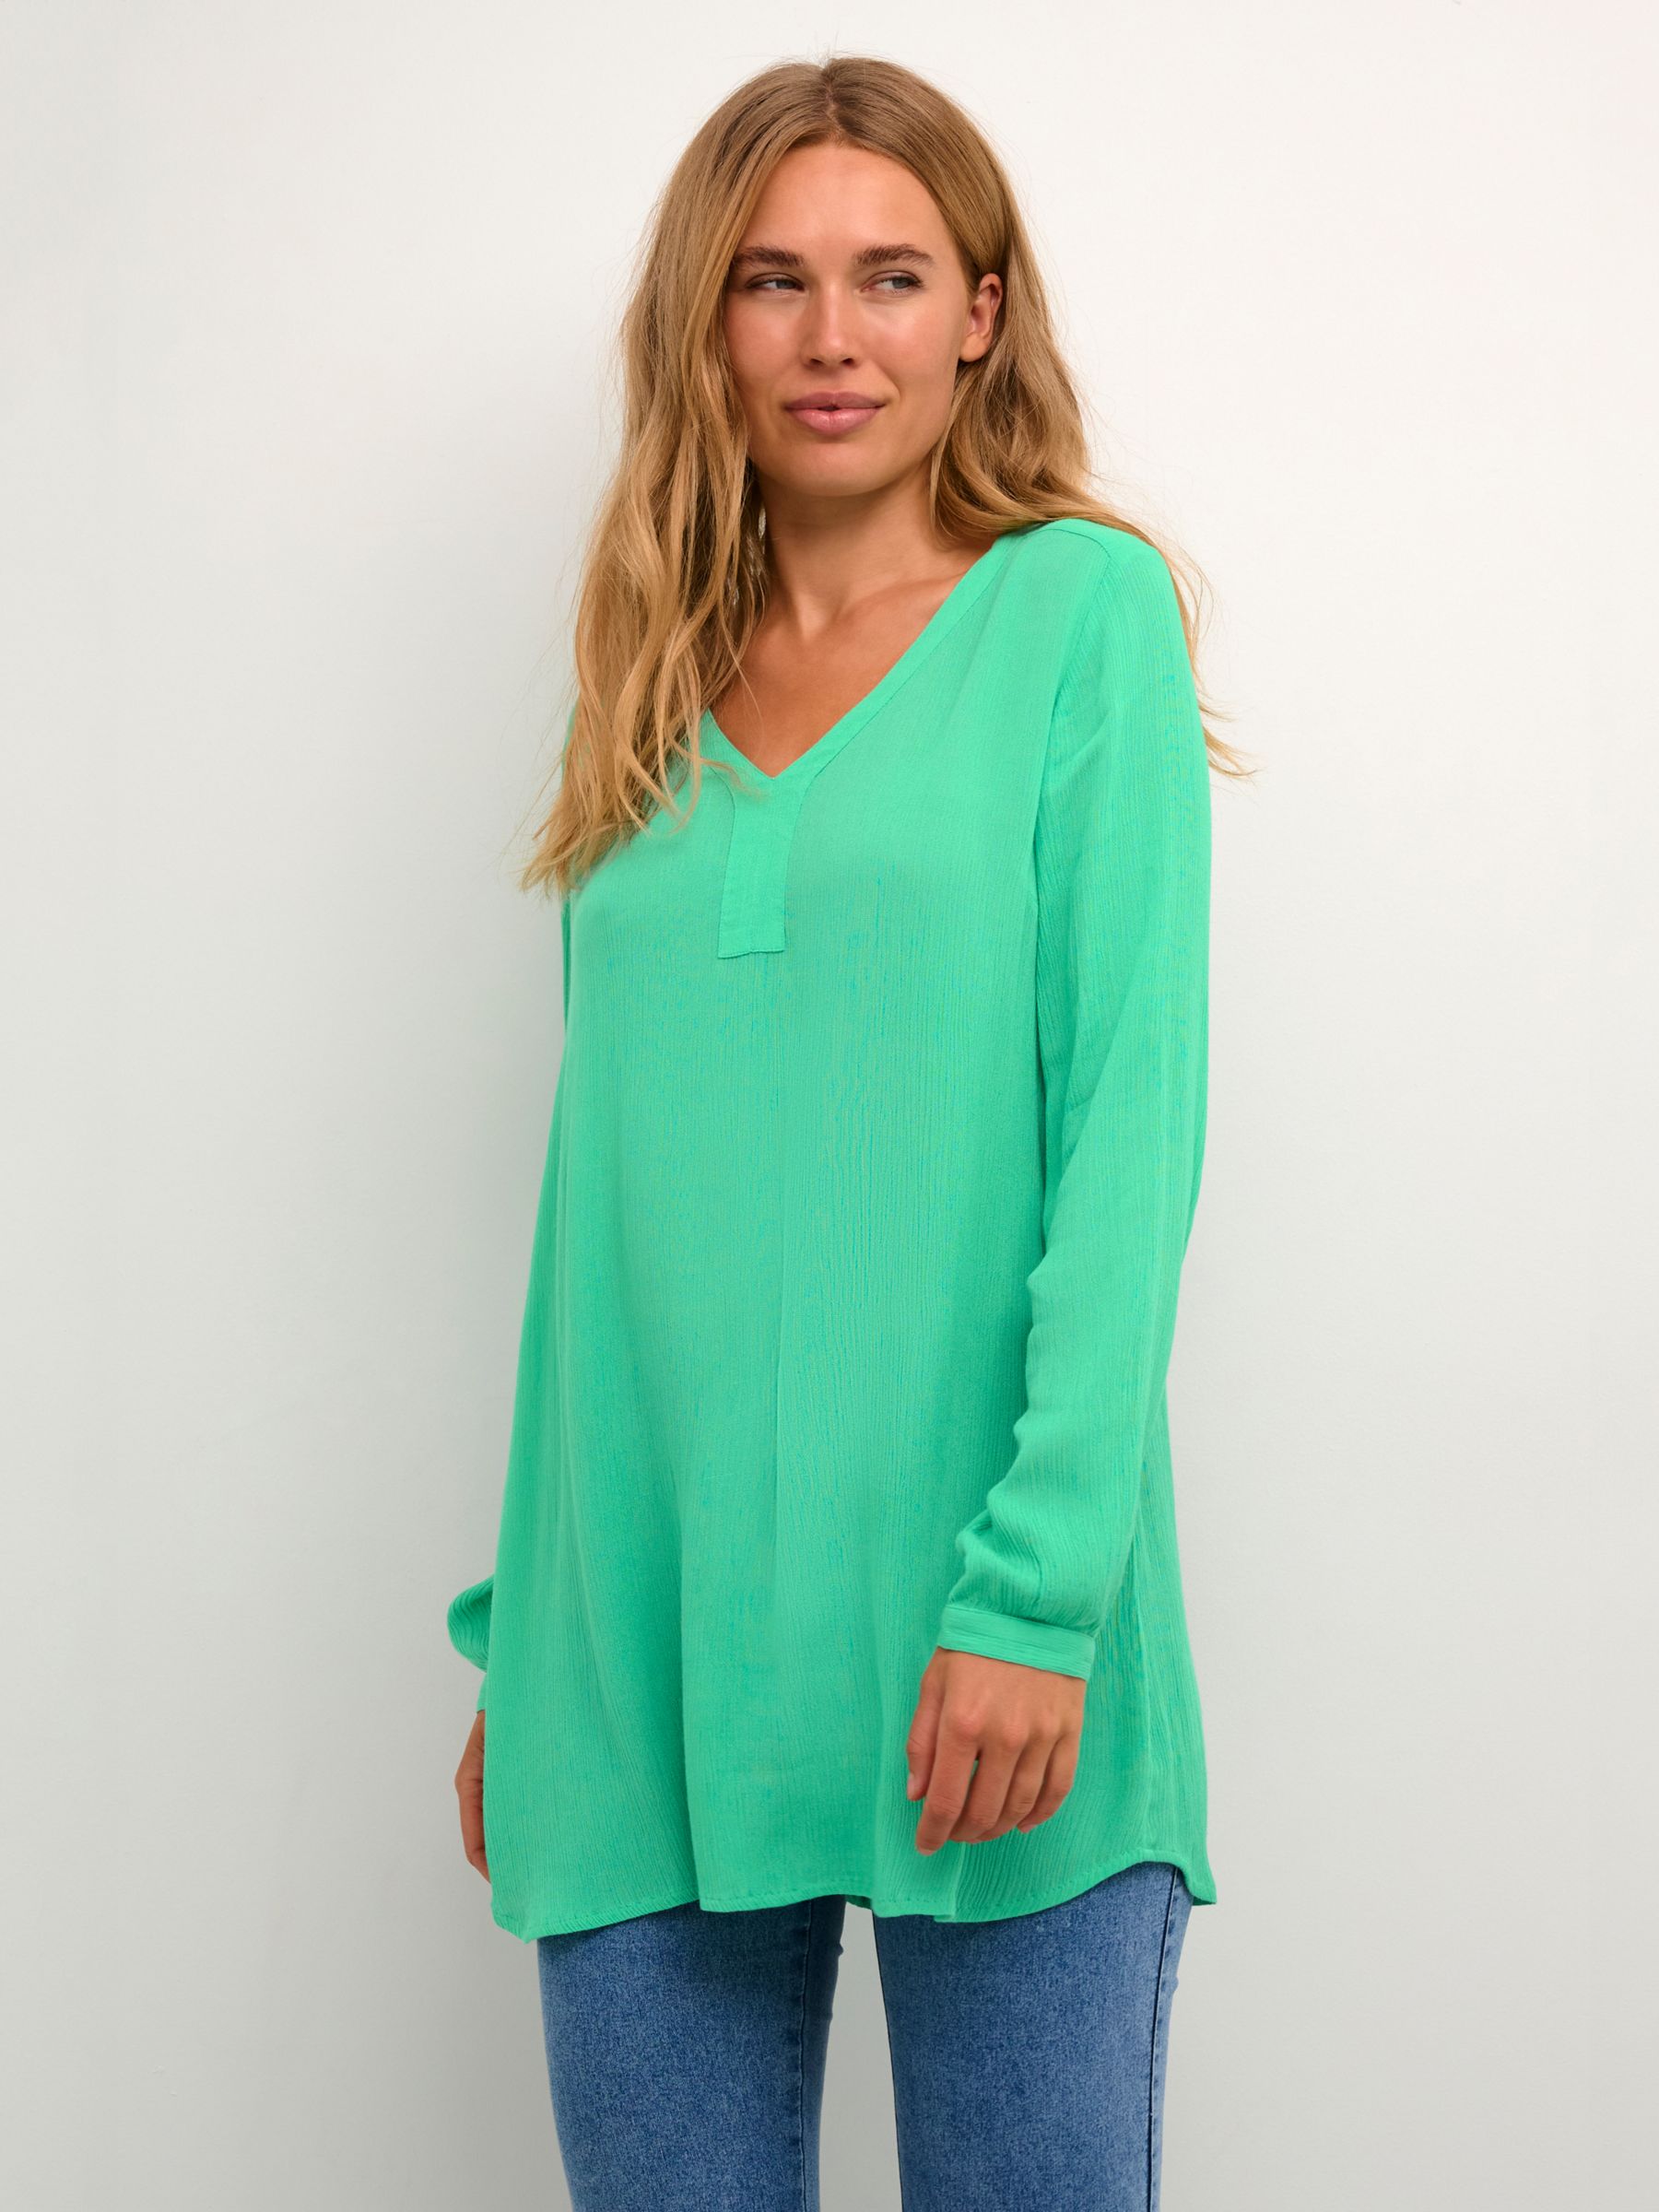 Tunic Top, Tunics, Tunic, Womens Tunic, Ethnic Top, Western Top, Green With  White, S M L, V Neck, Bell Sleeve -  Canada